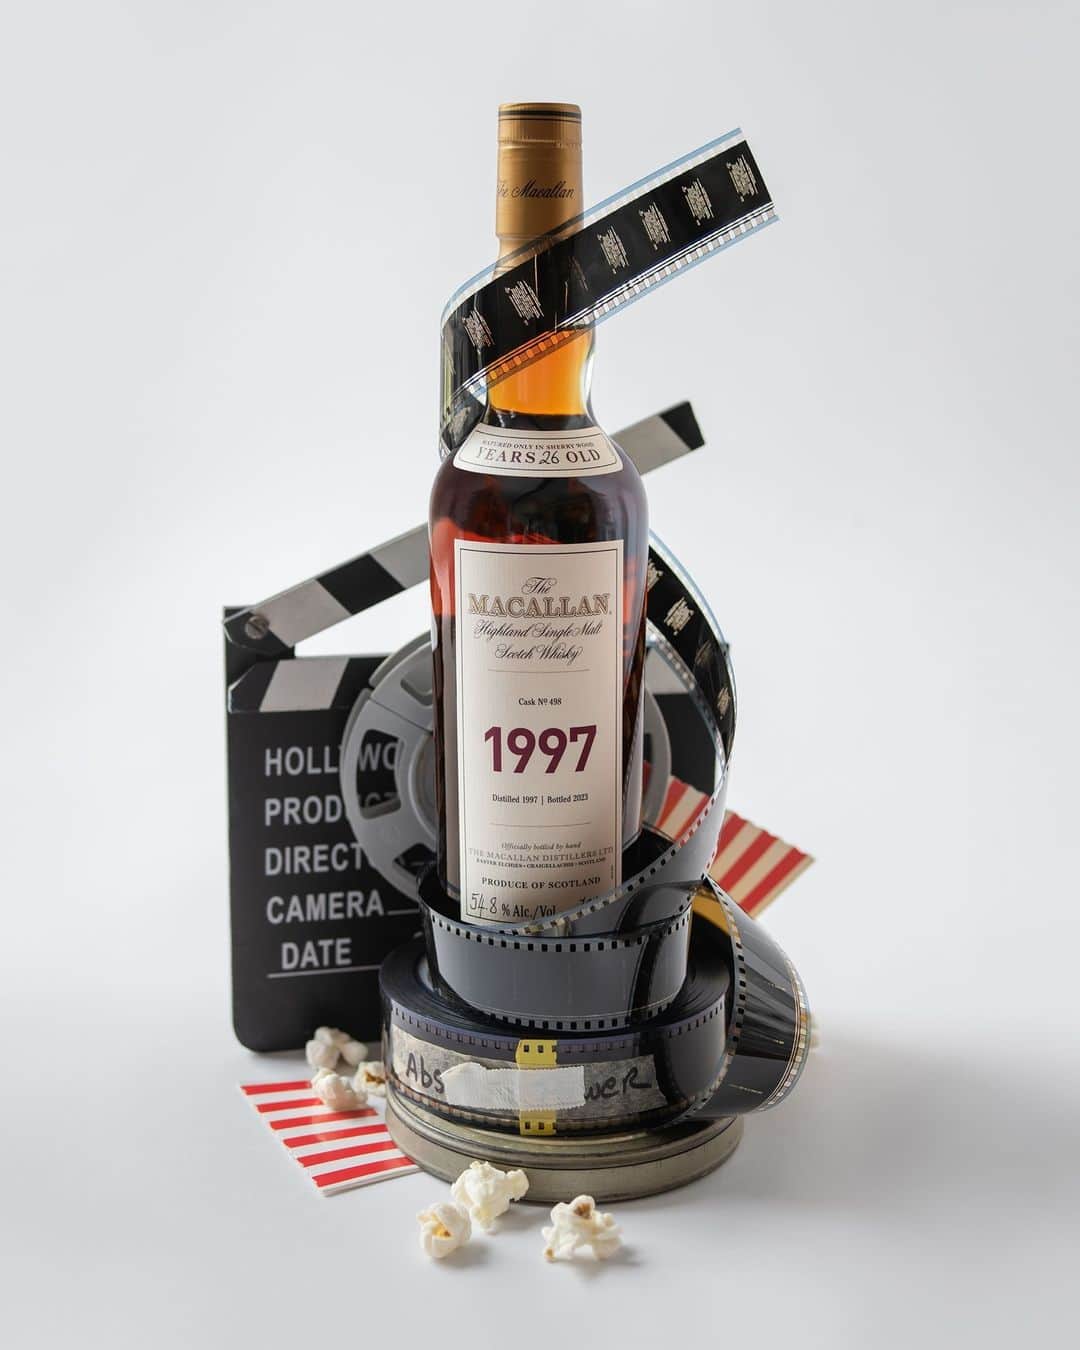 The Macallanのインスタグラム：「A rare opportunity to explore those that have come before us.⁣ ⁣ The Macallan Fine & Rare 1997 has been photographed by Tim Walker, who exquisitely captures a year that was captivated by the glamour and allure of Hollywood. ⁣ ⁣ Discover more via link in bio.  ⁣ Crafted without compromise. Please savour The Macallan responsibly.⁣ ⁣ #TheMacallan #TheMacallaninCinema #FineandRare」